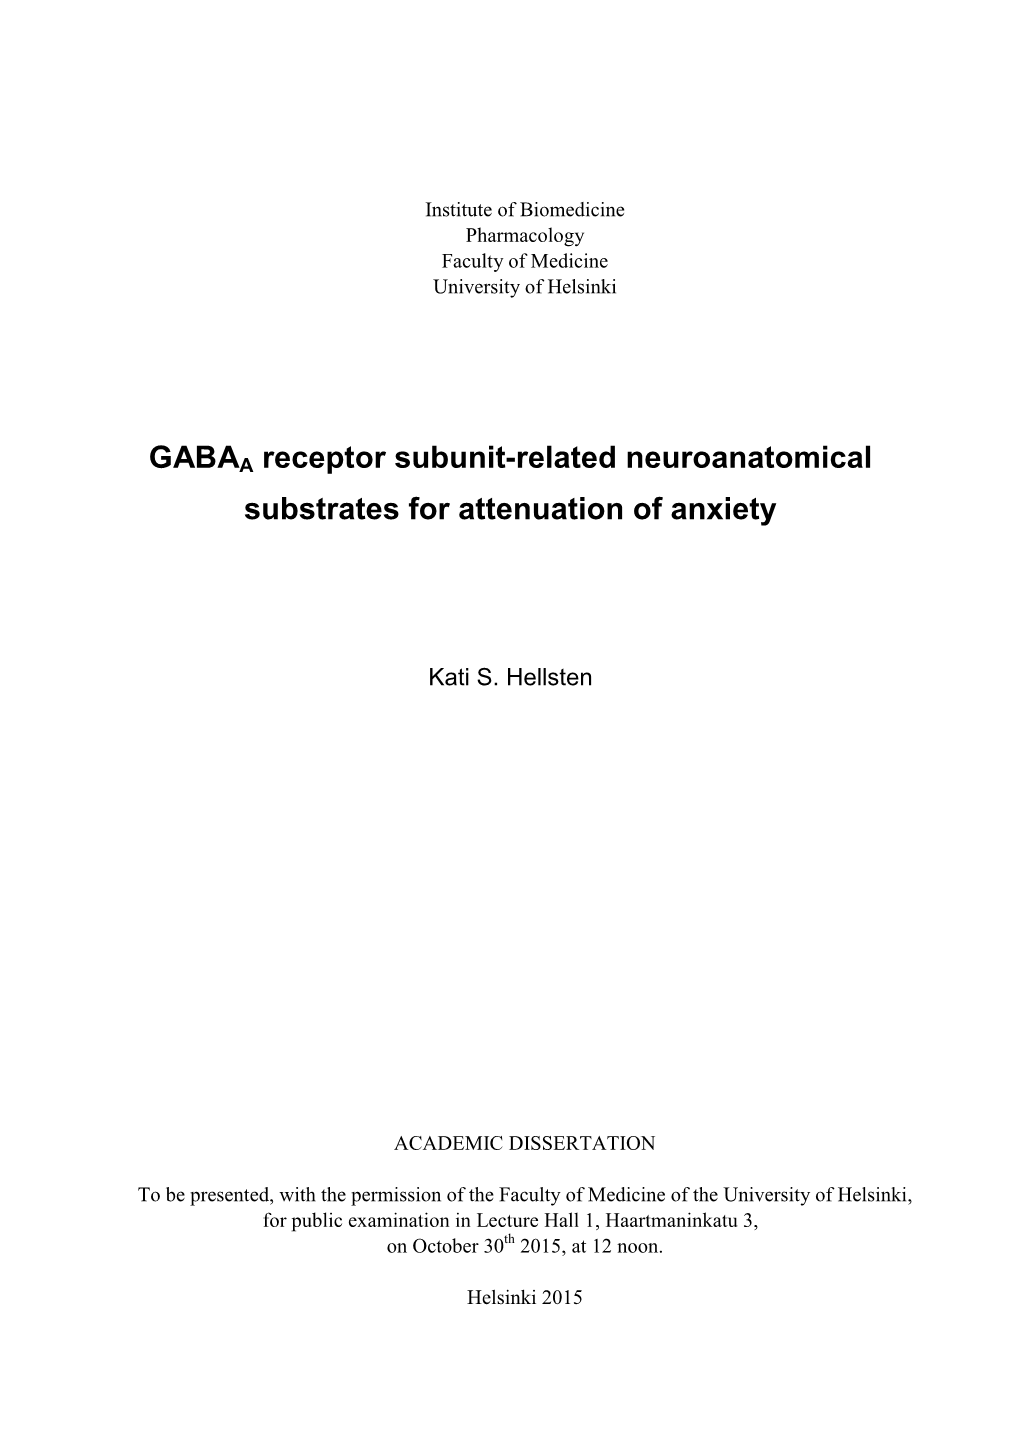 GABAA Receptor Subunit-Related Neuroanatomical Substrates for Attenuation of Anxiety